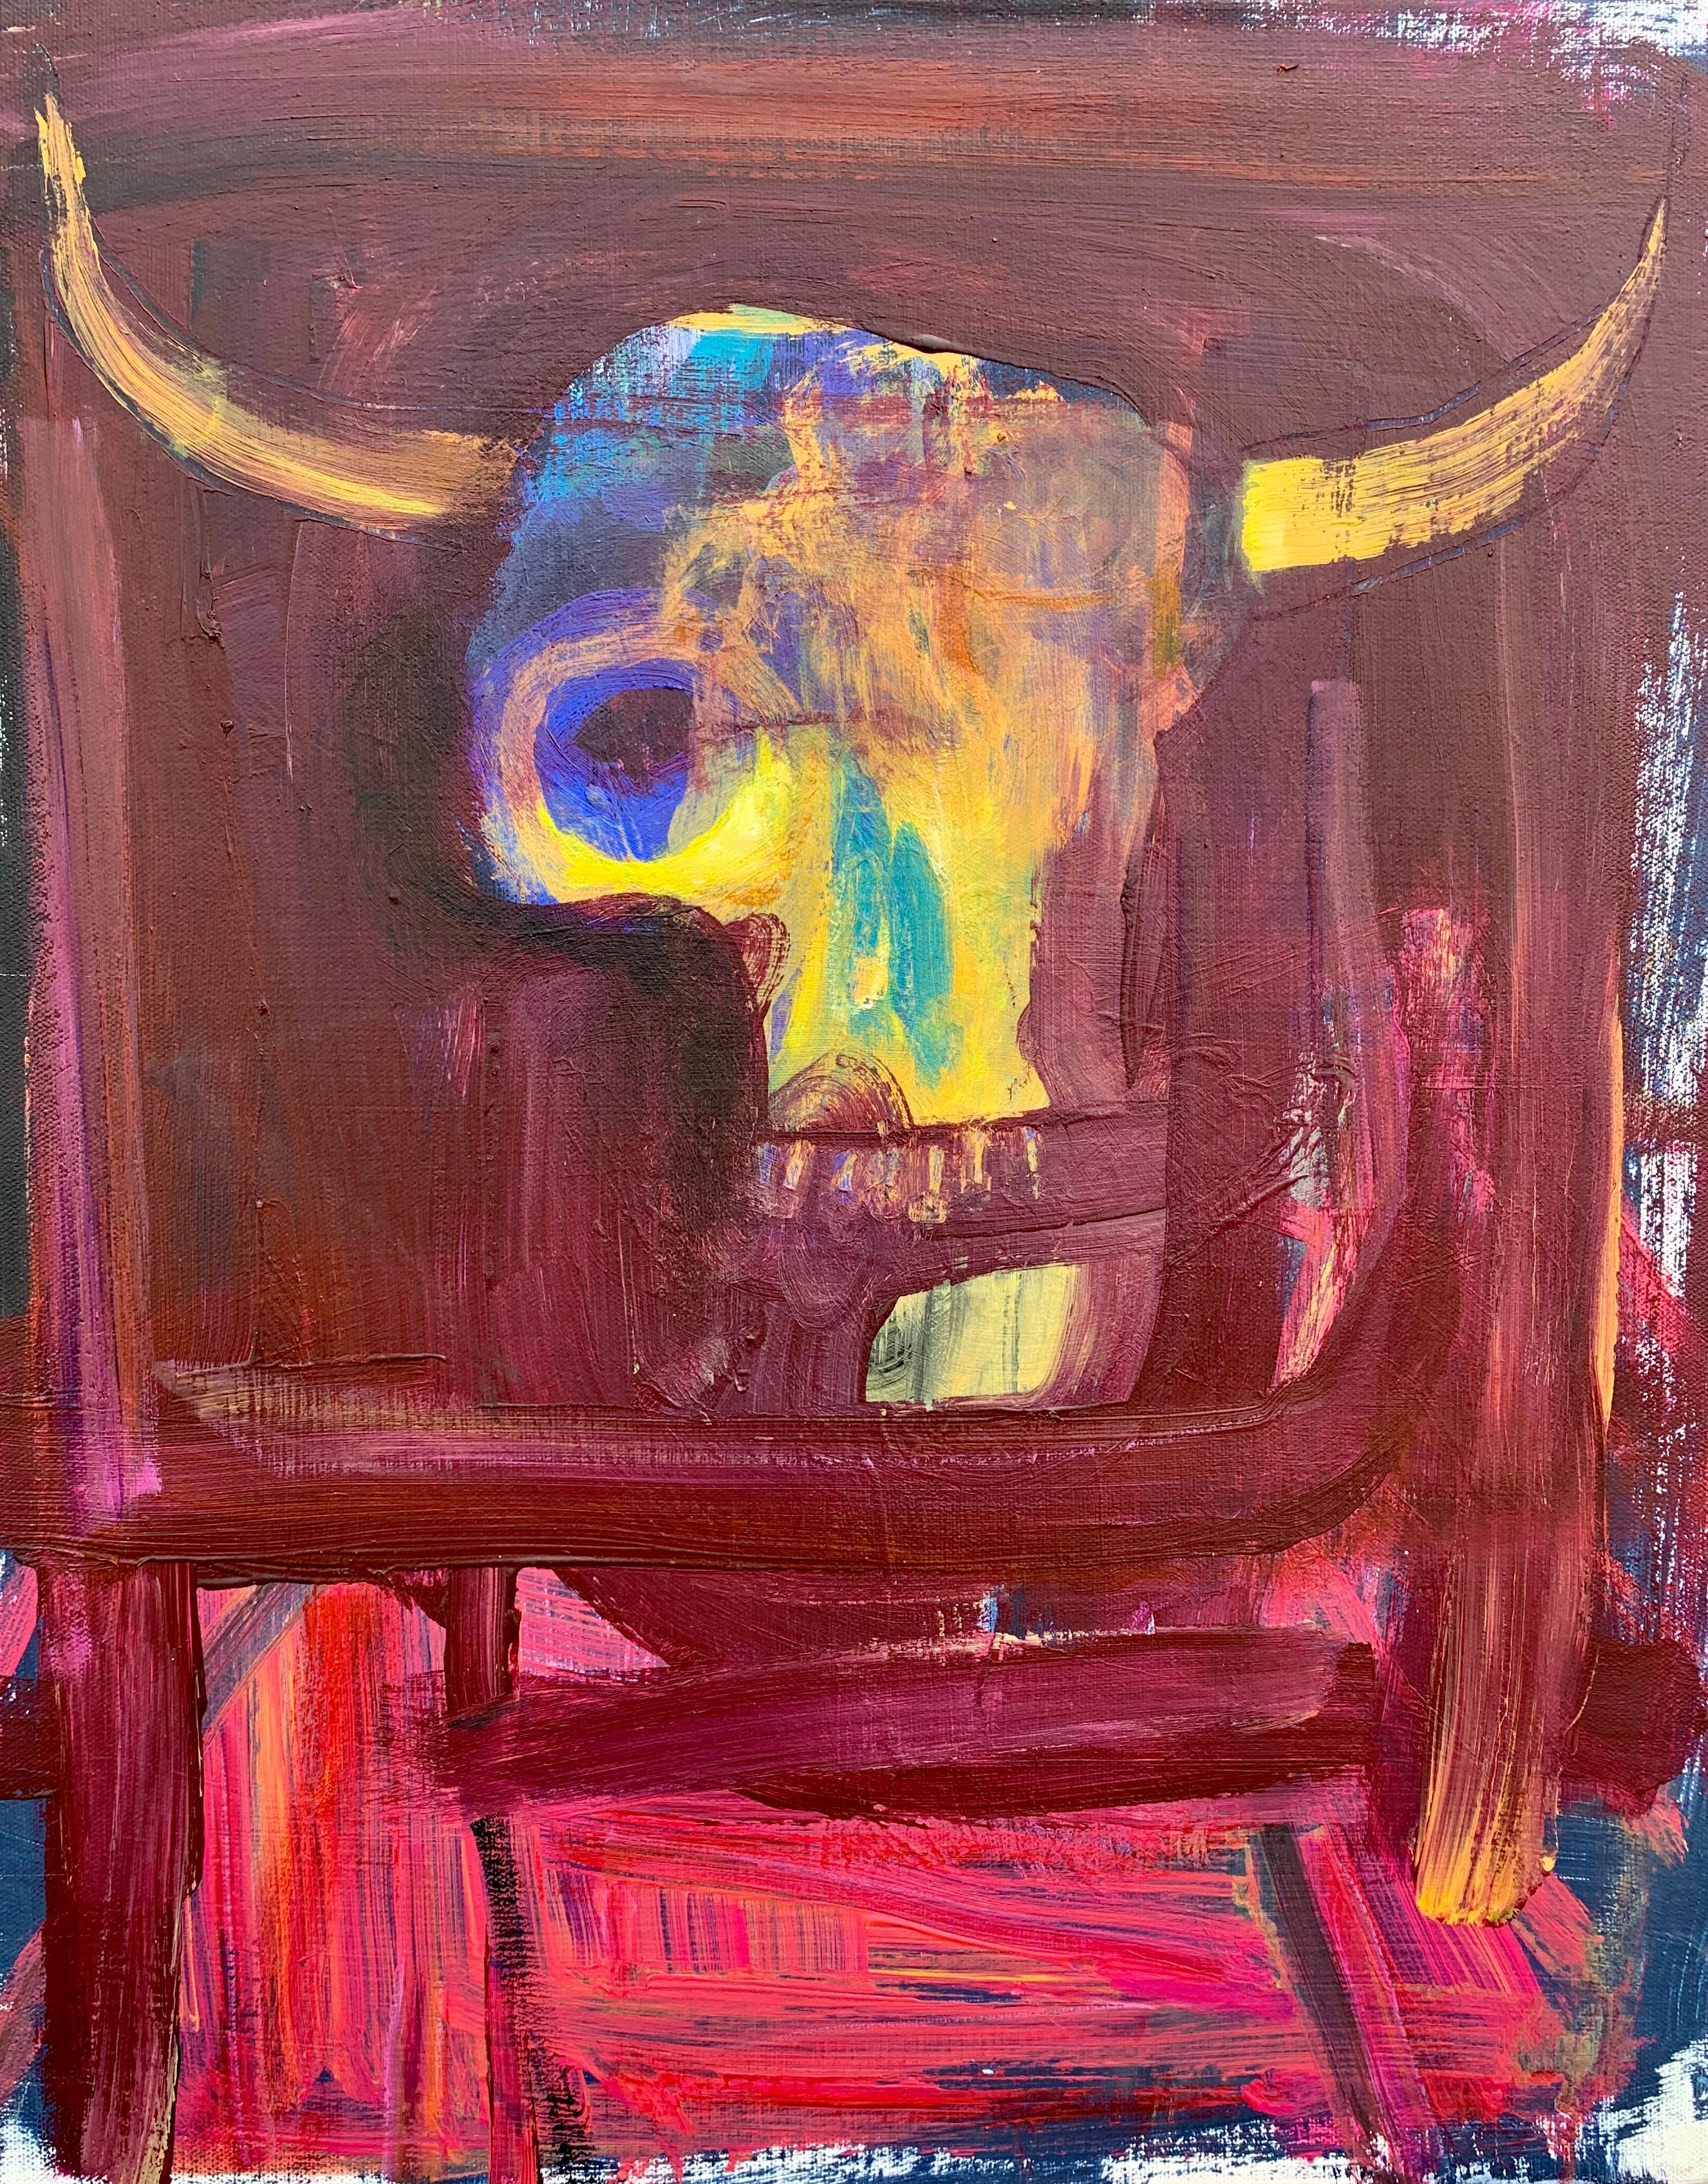 Cow Skull Sunset, Original Painting - Art by Damian Gomes